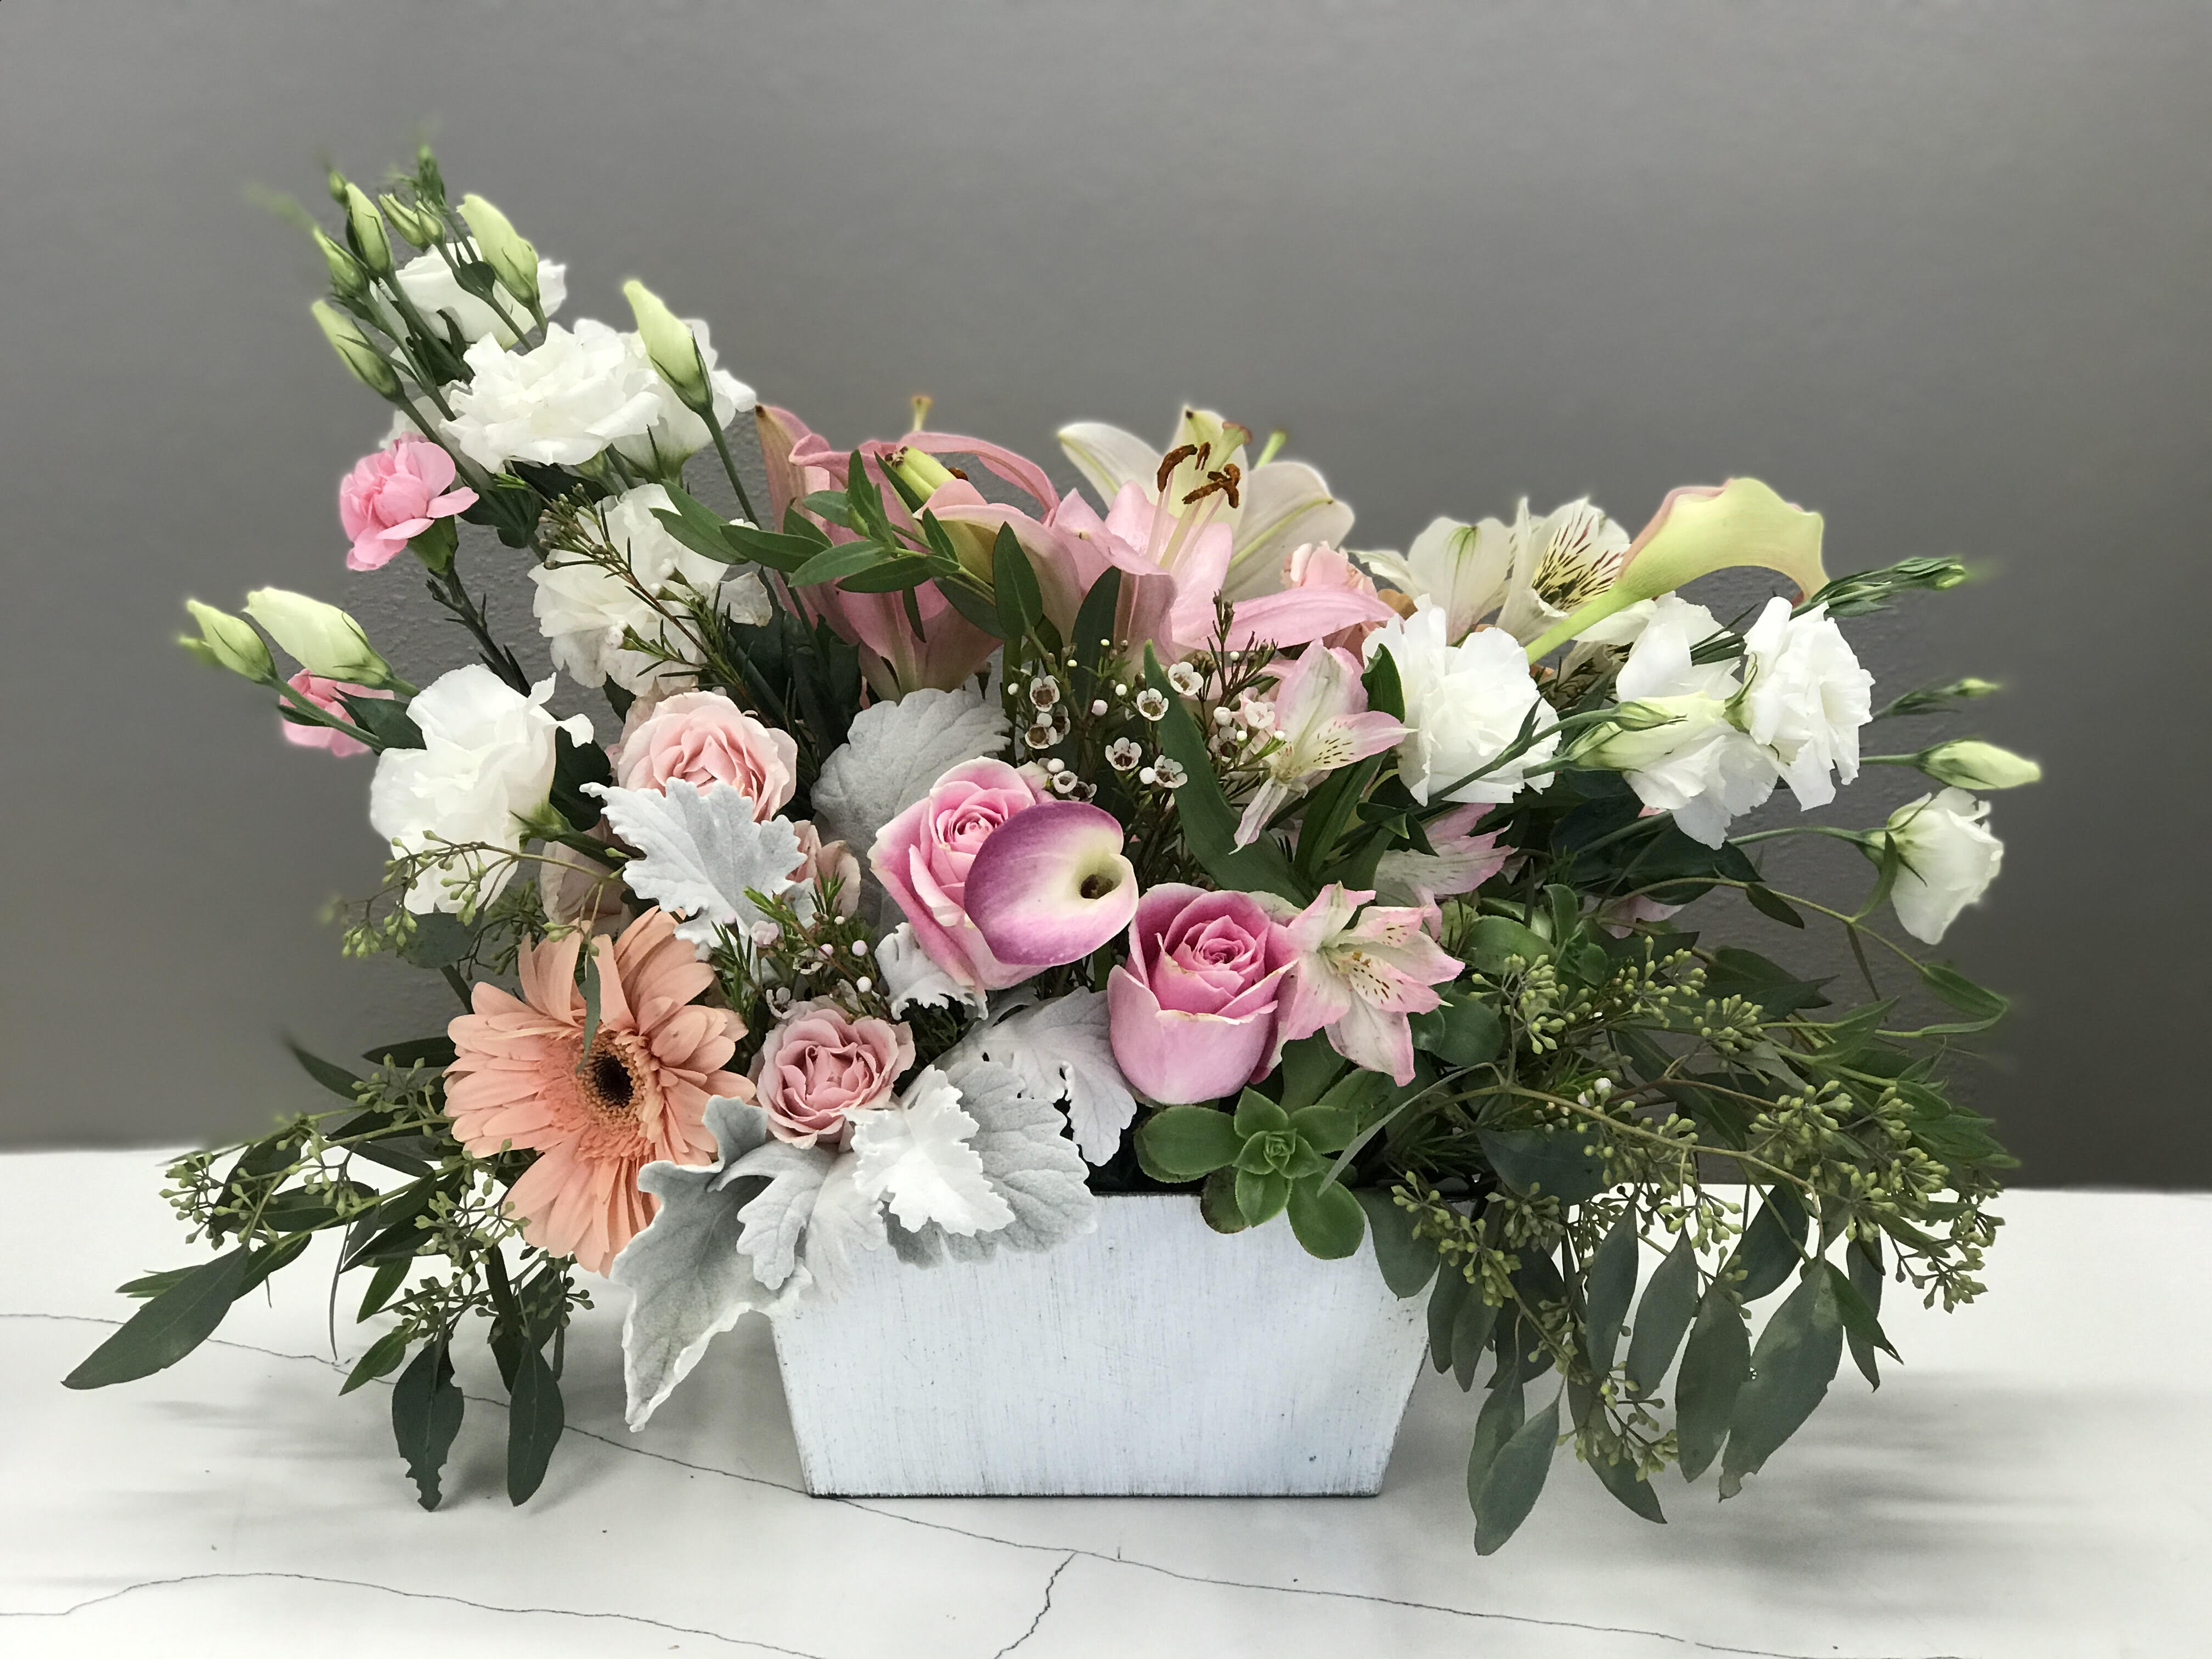 Skirted in Pink - A basket of premium pink and white flowers will show your loved ones just how much you care with simple elegance and tickle of pink.